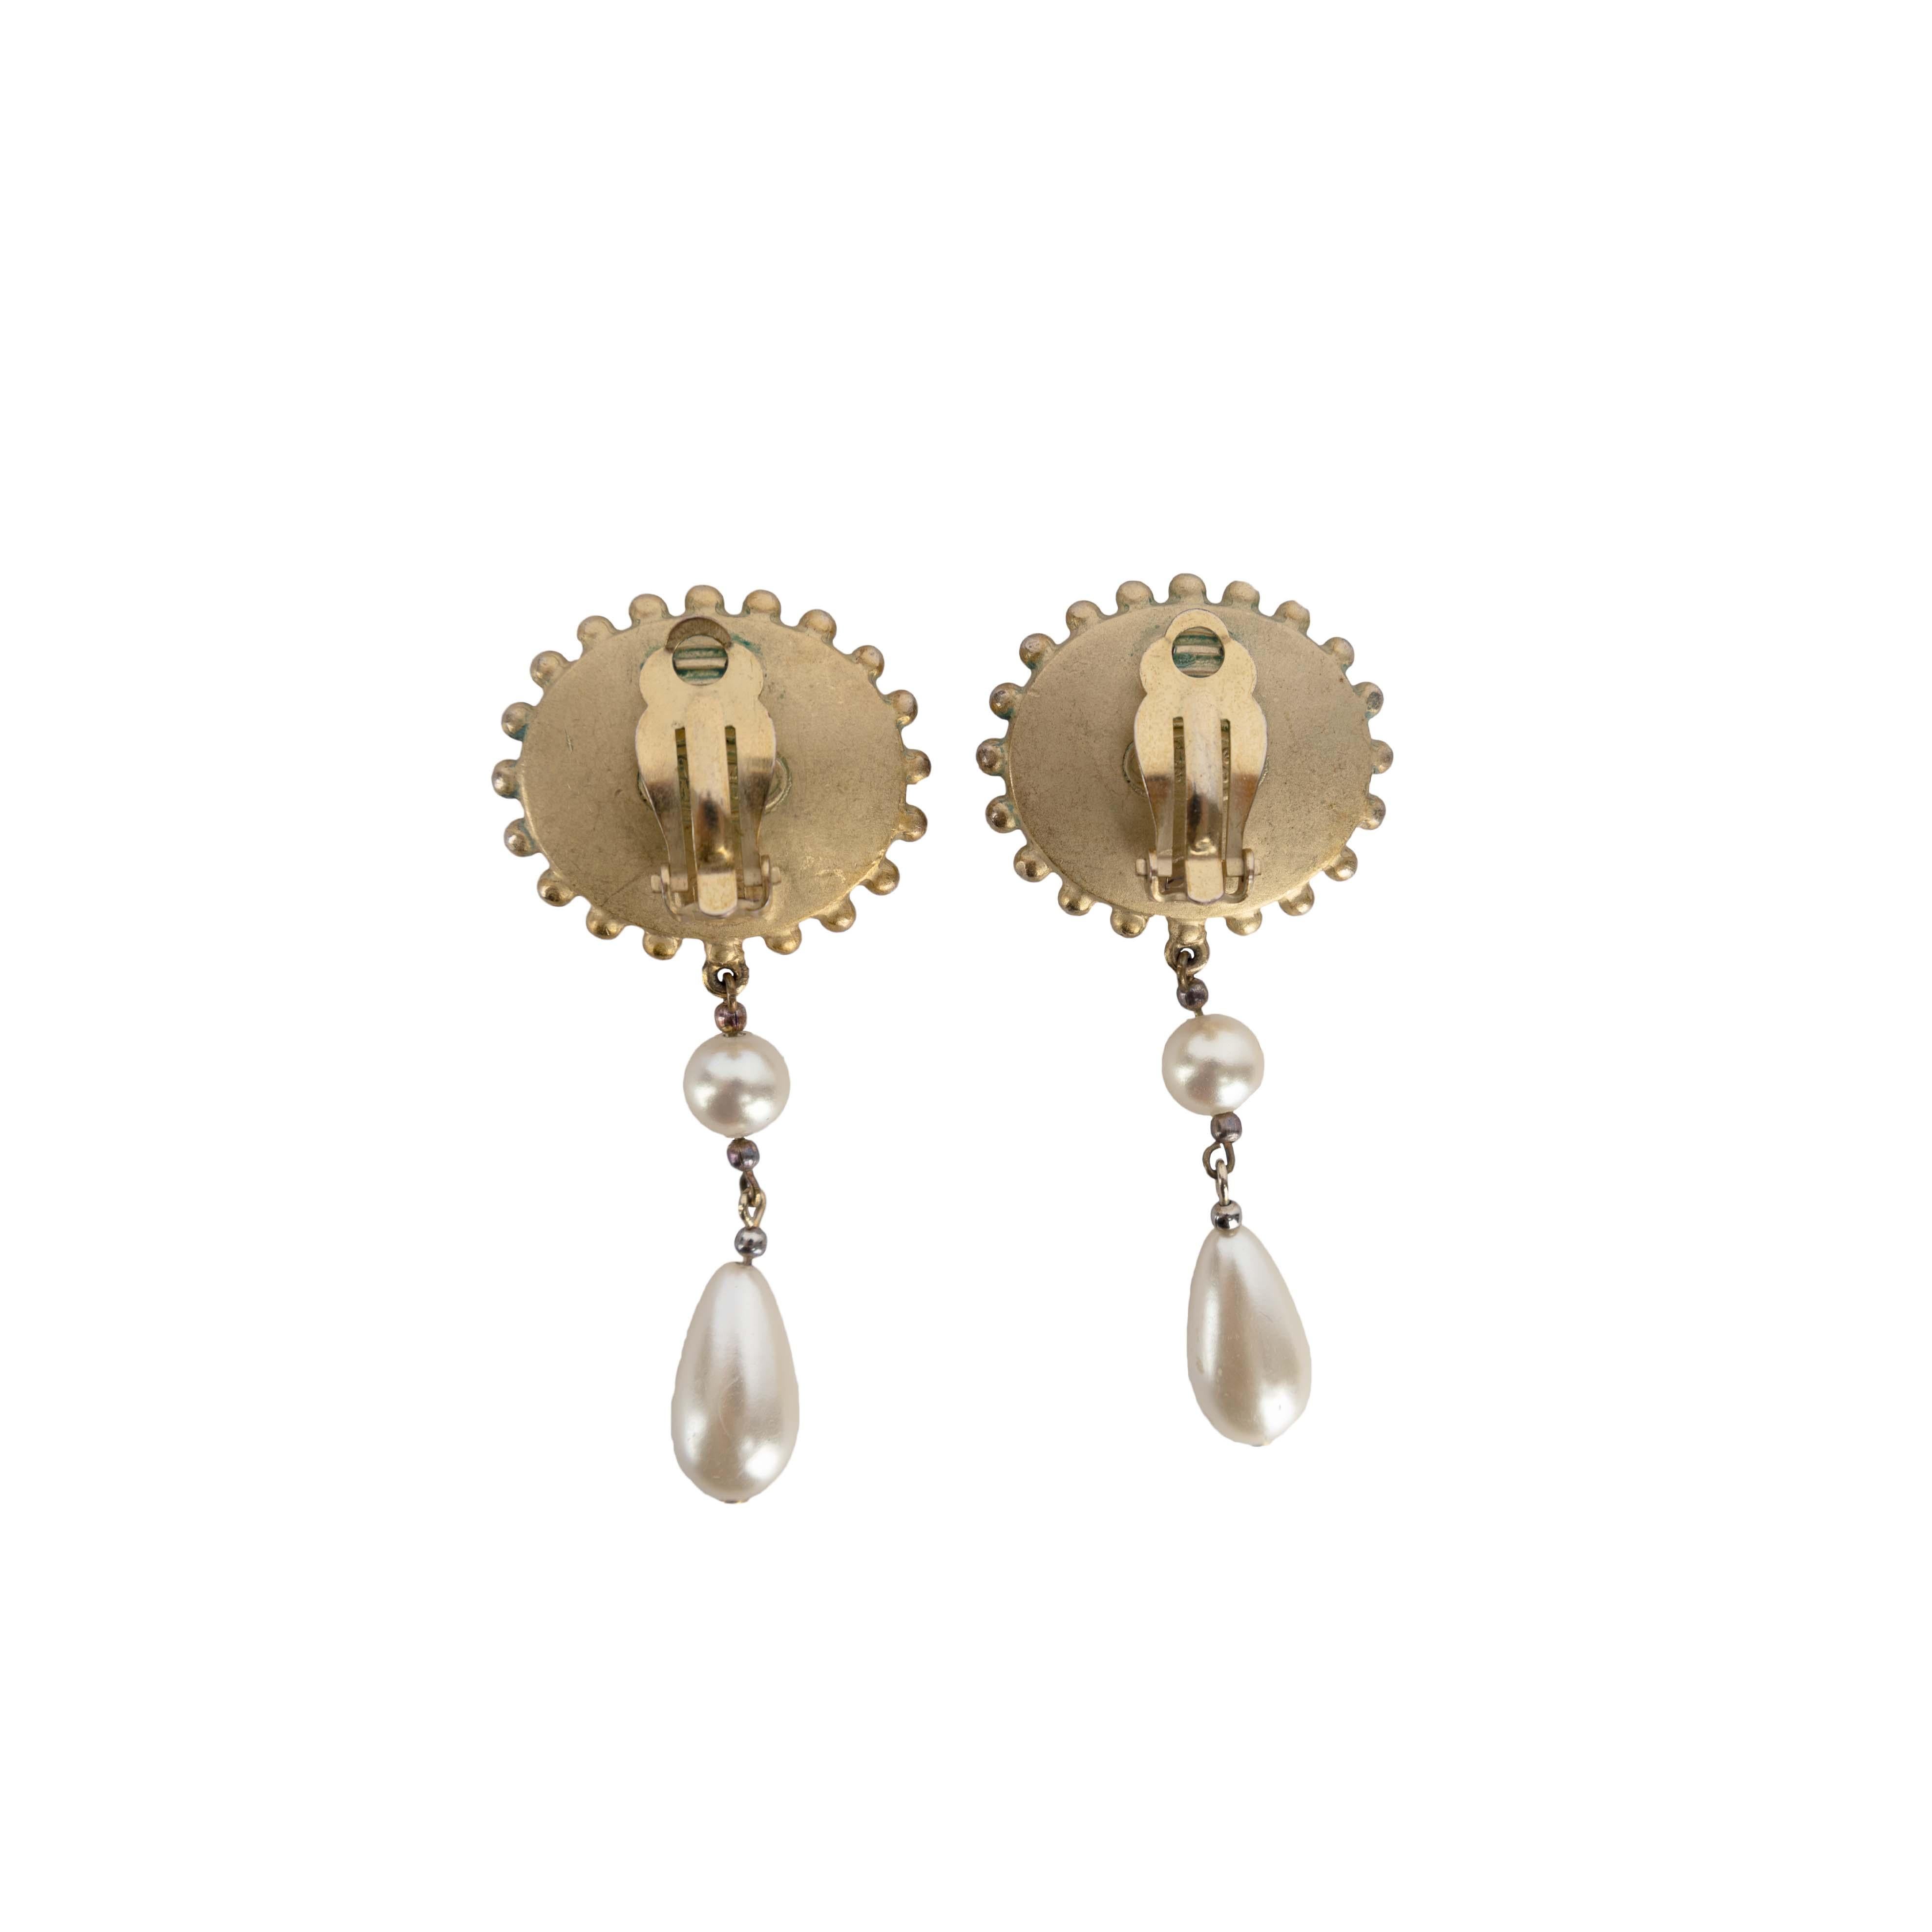 Elevate the vintage vibes with the Vivienne Westwood Rare Loelia Earrings with Pearl. Showcasing both the round faux pearl and the teardrop pearl, the earring features the brand logo embellished with golden hardware.